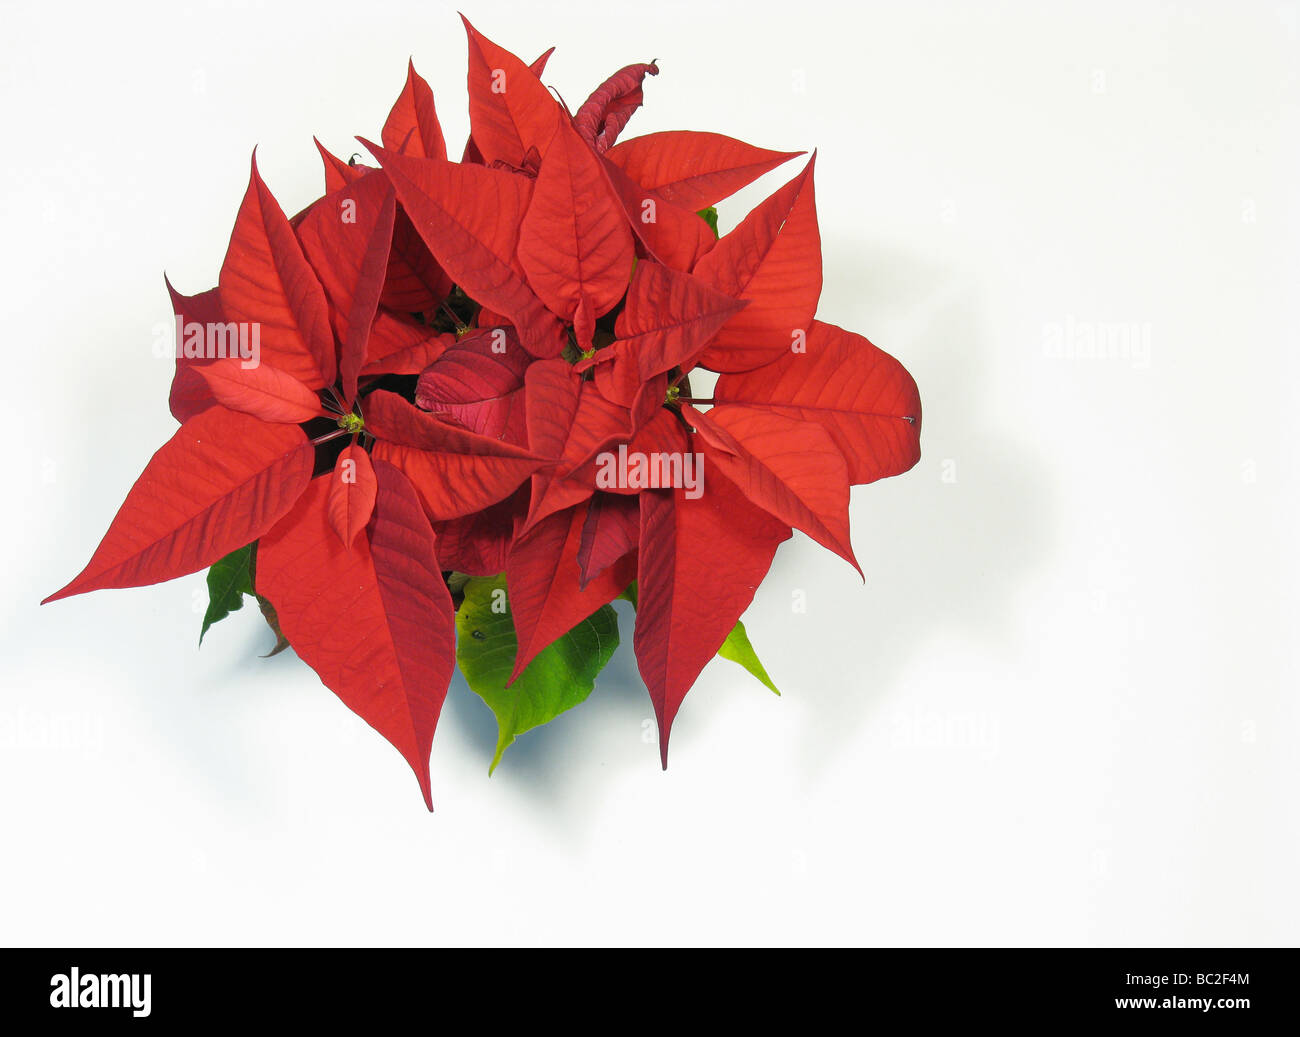 poinsettia seen from above on white background Stock Photo